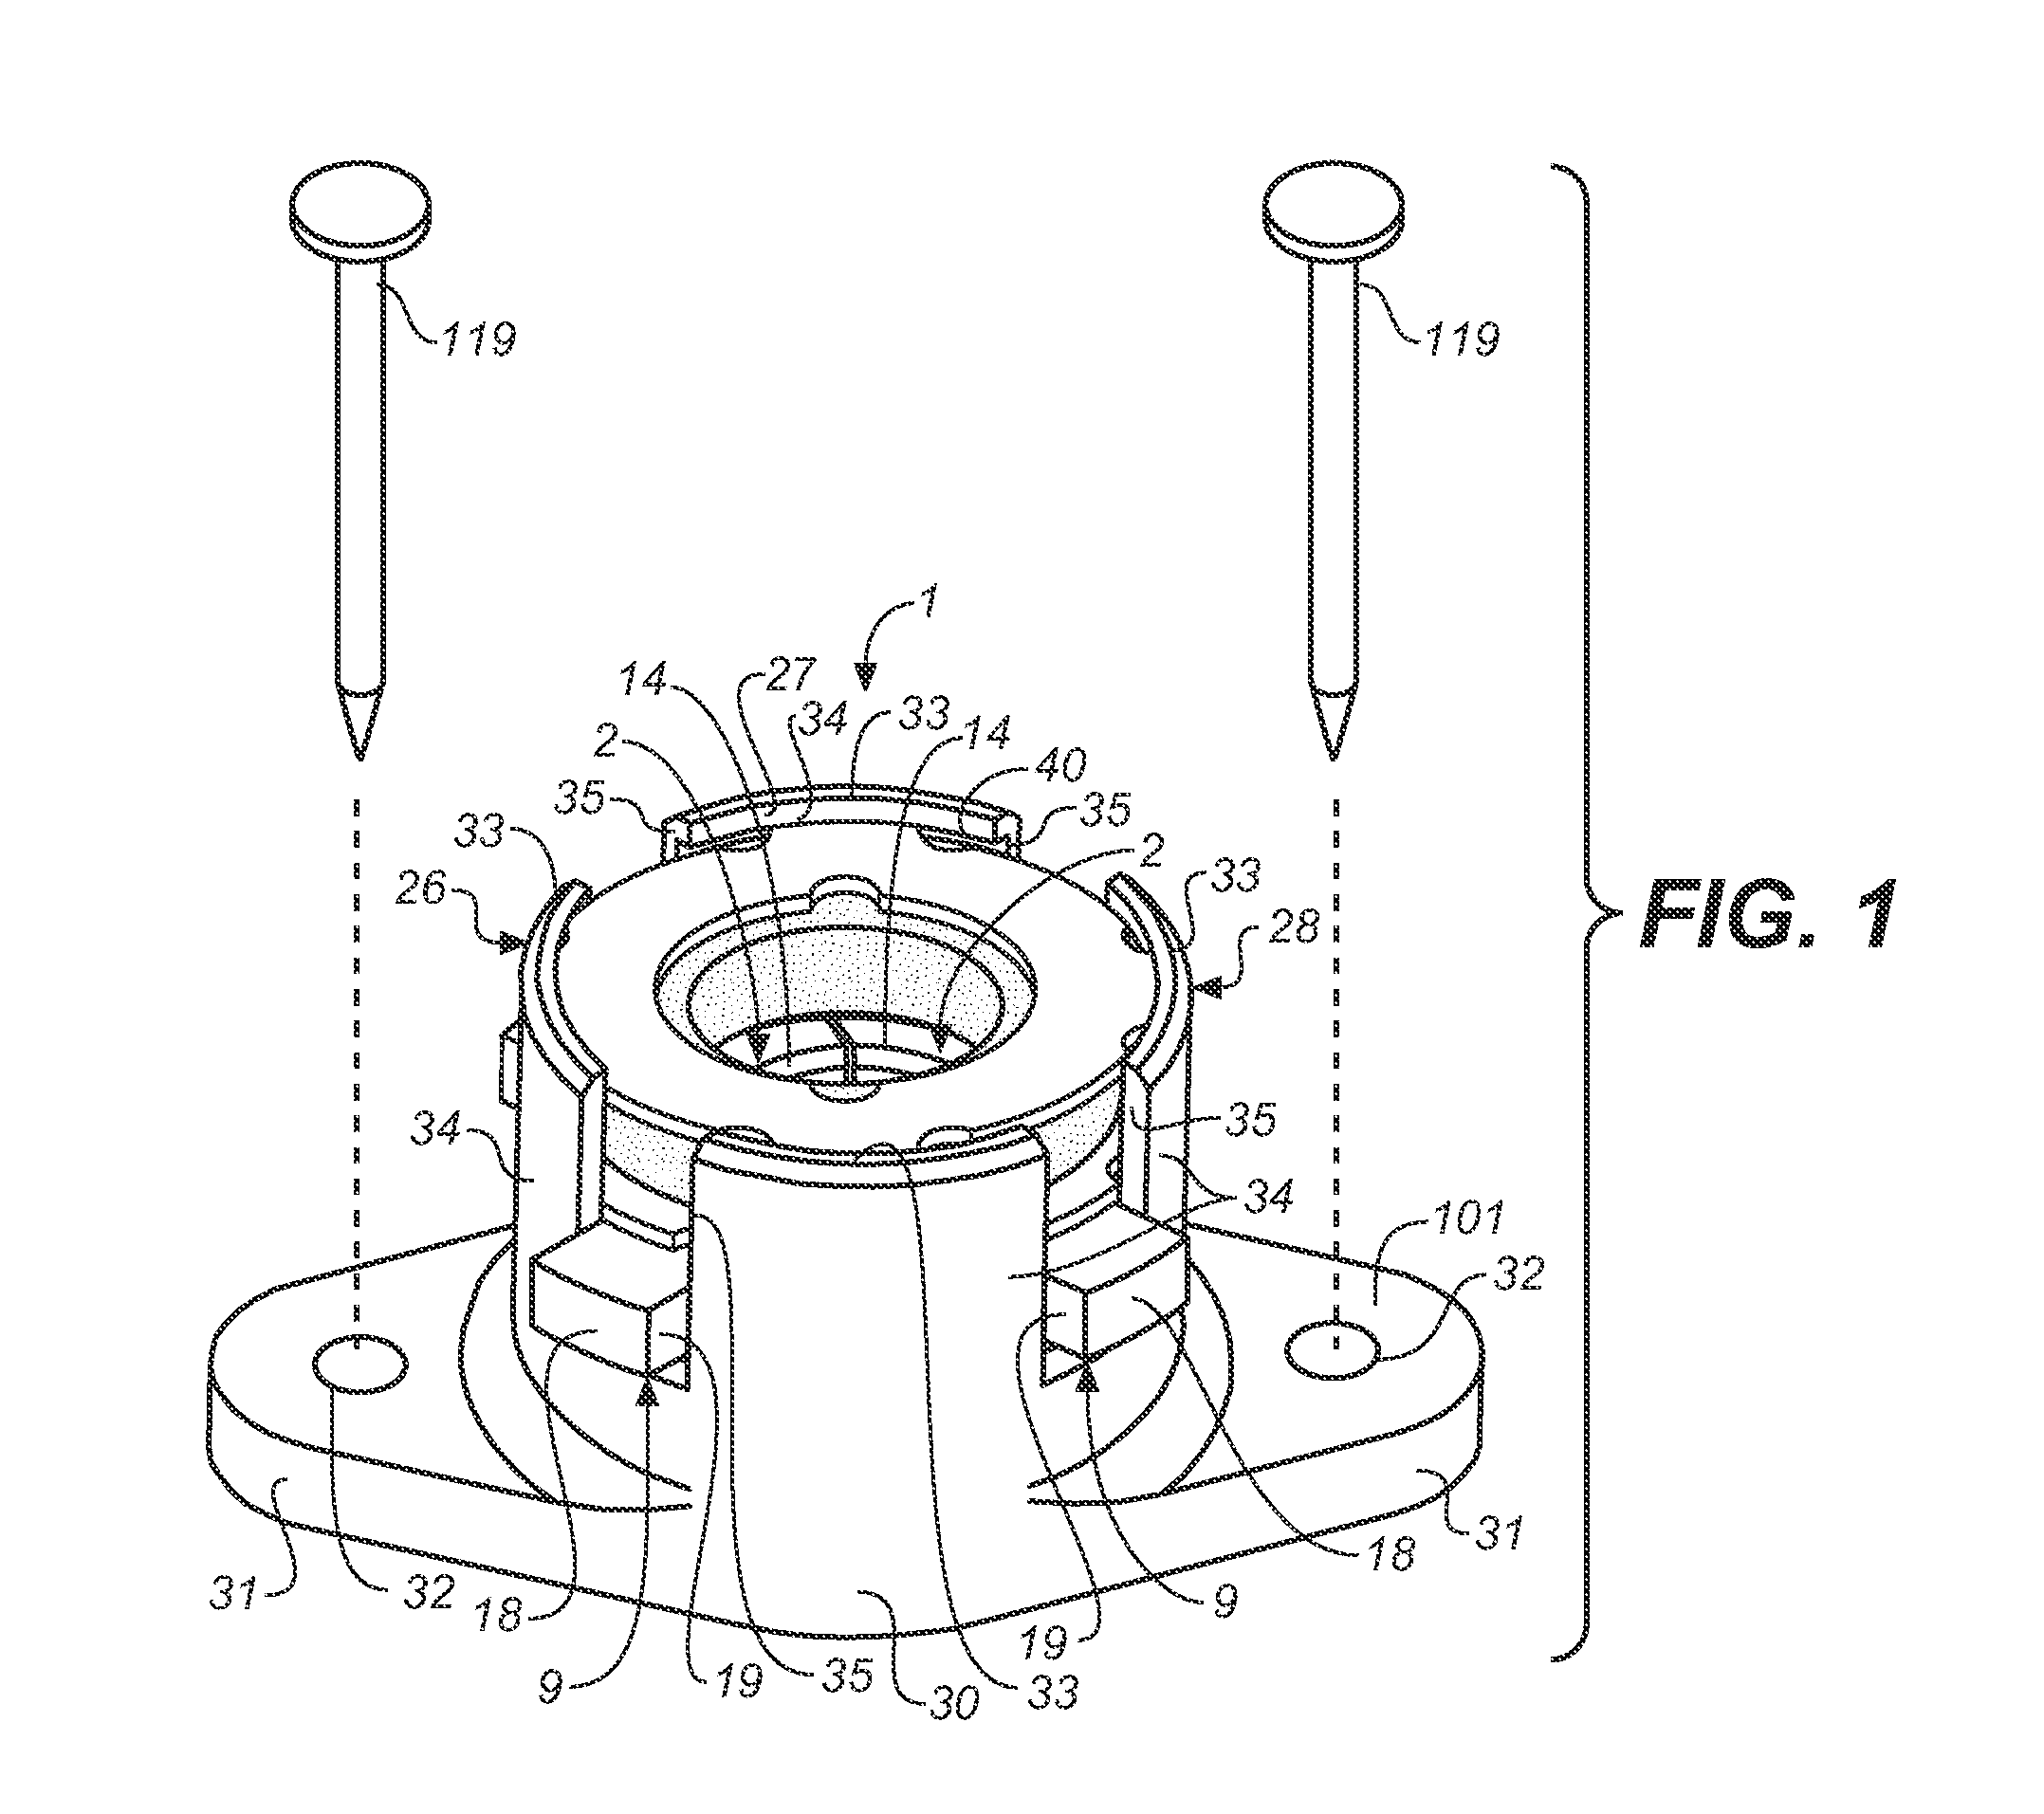 Ratcheting take-up device